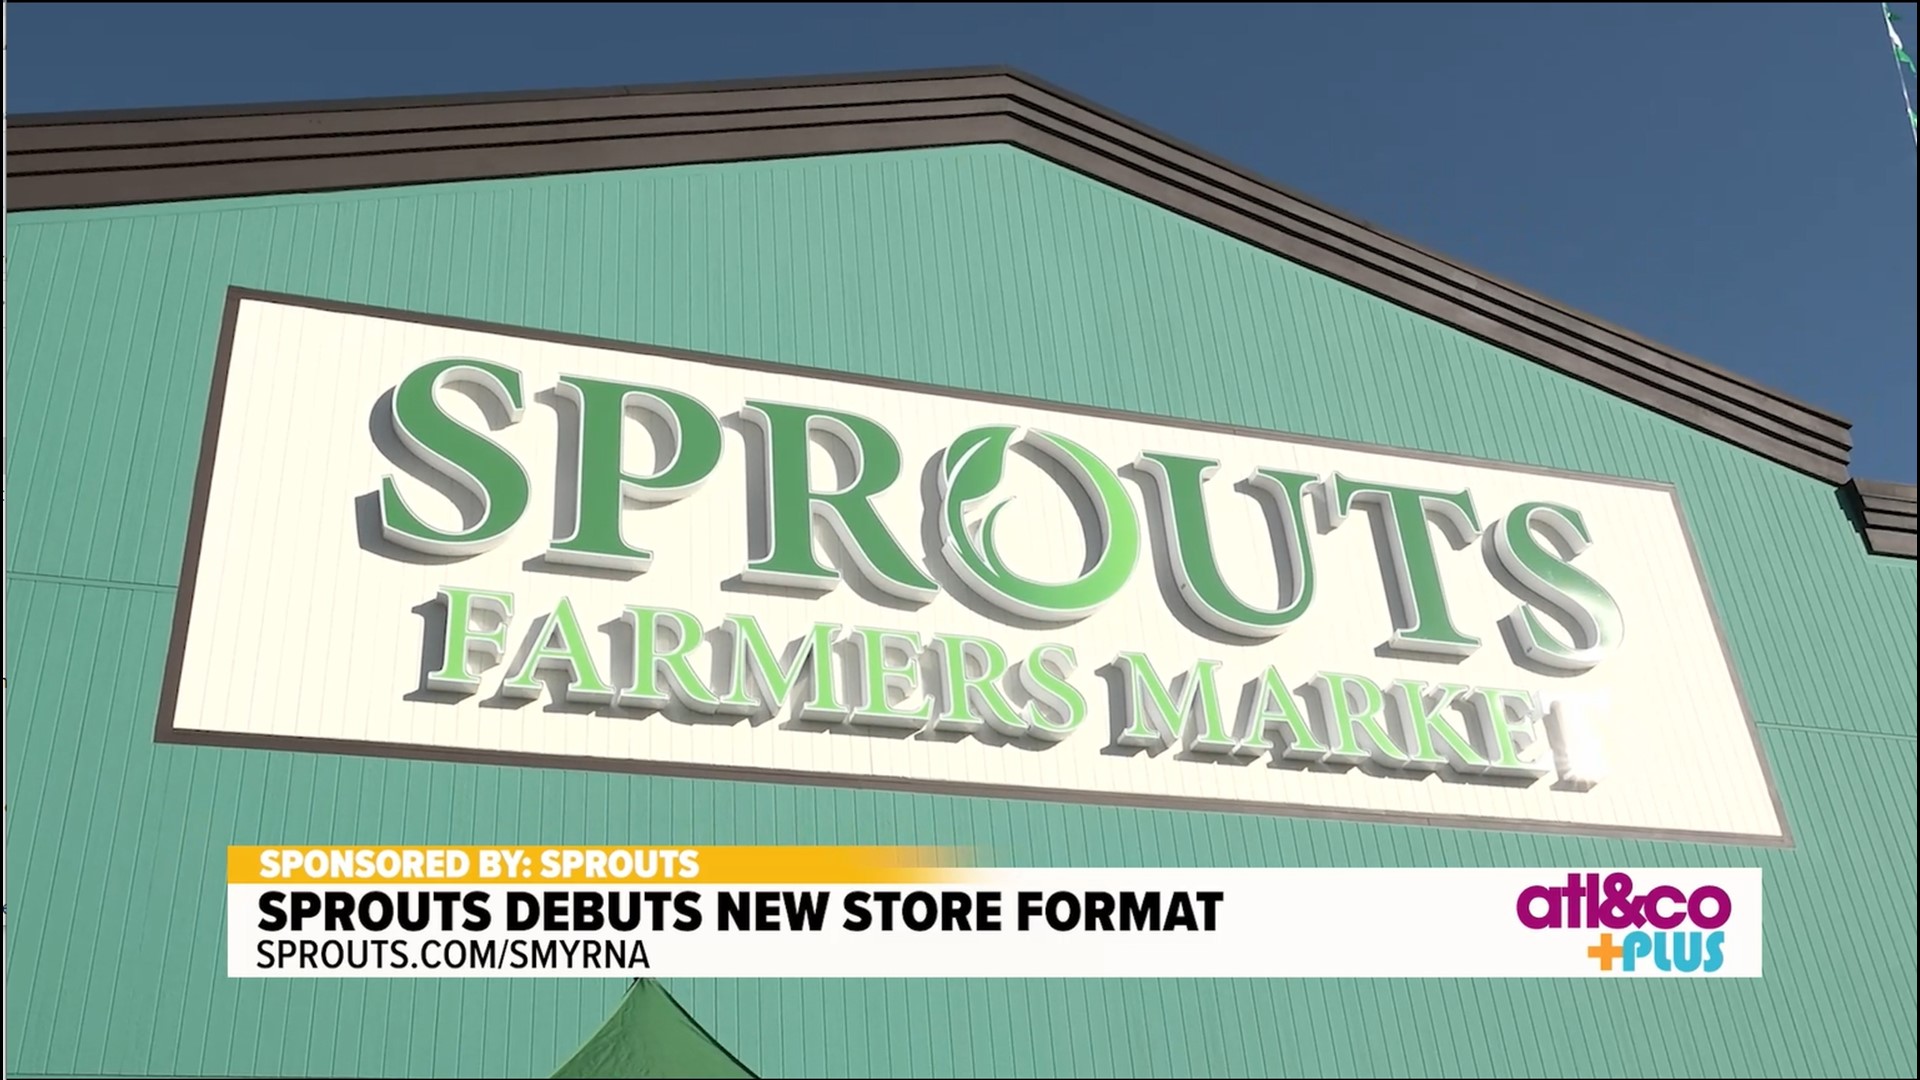 Christine takes us inside Sprouts Farmers Market's innovative new store format in Smyrna, GA. New customers can download the Sprouts app for 20% off this weekend.